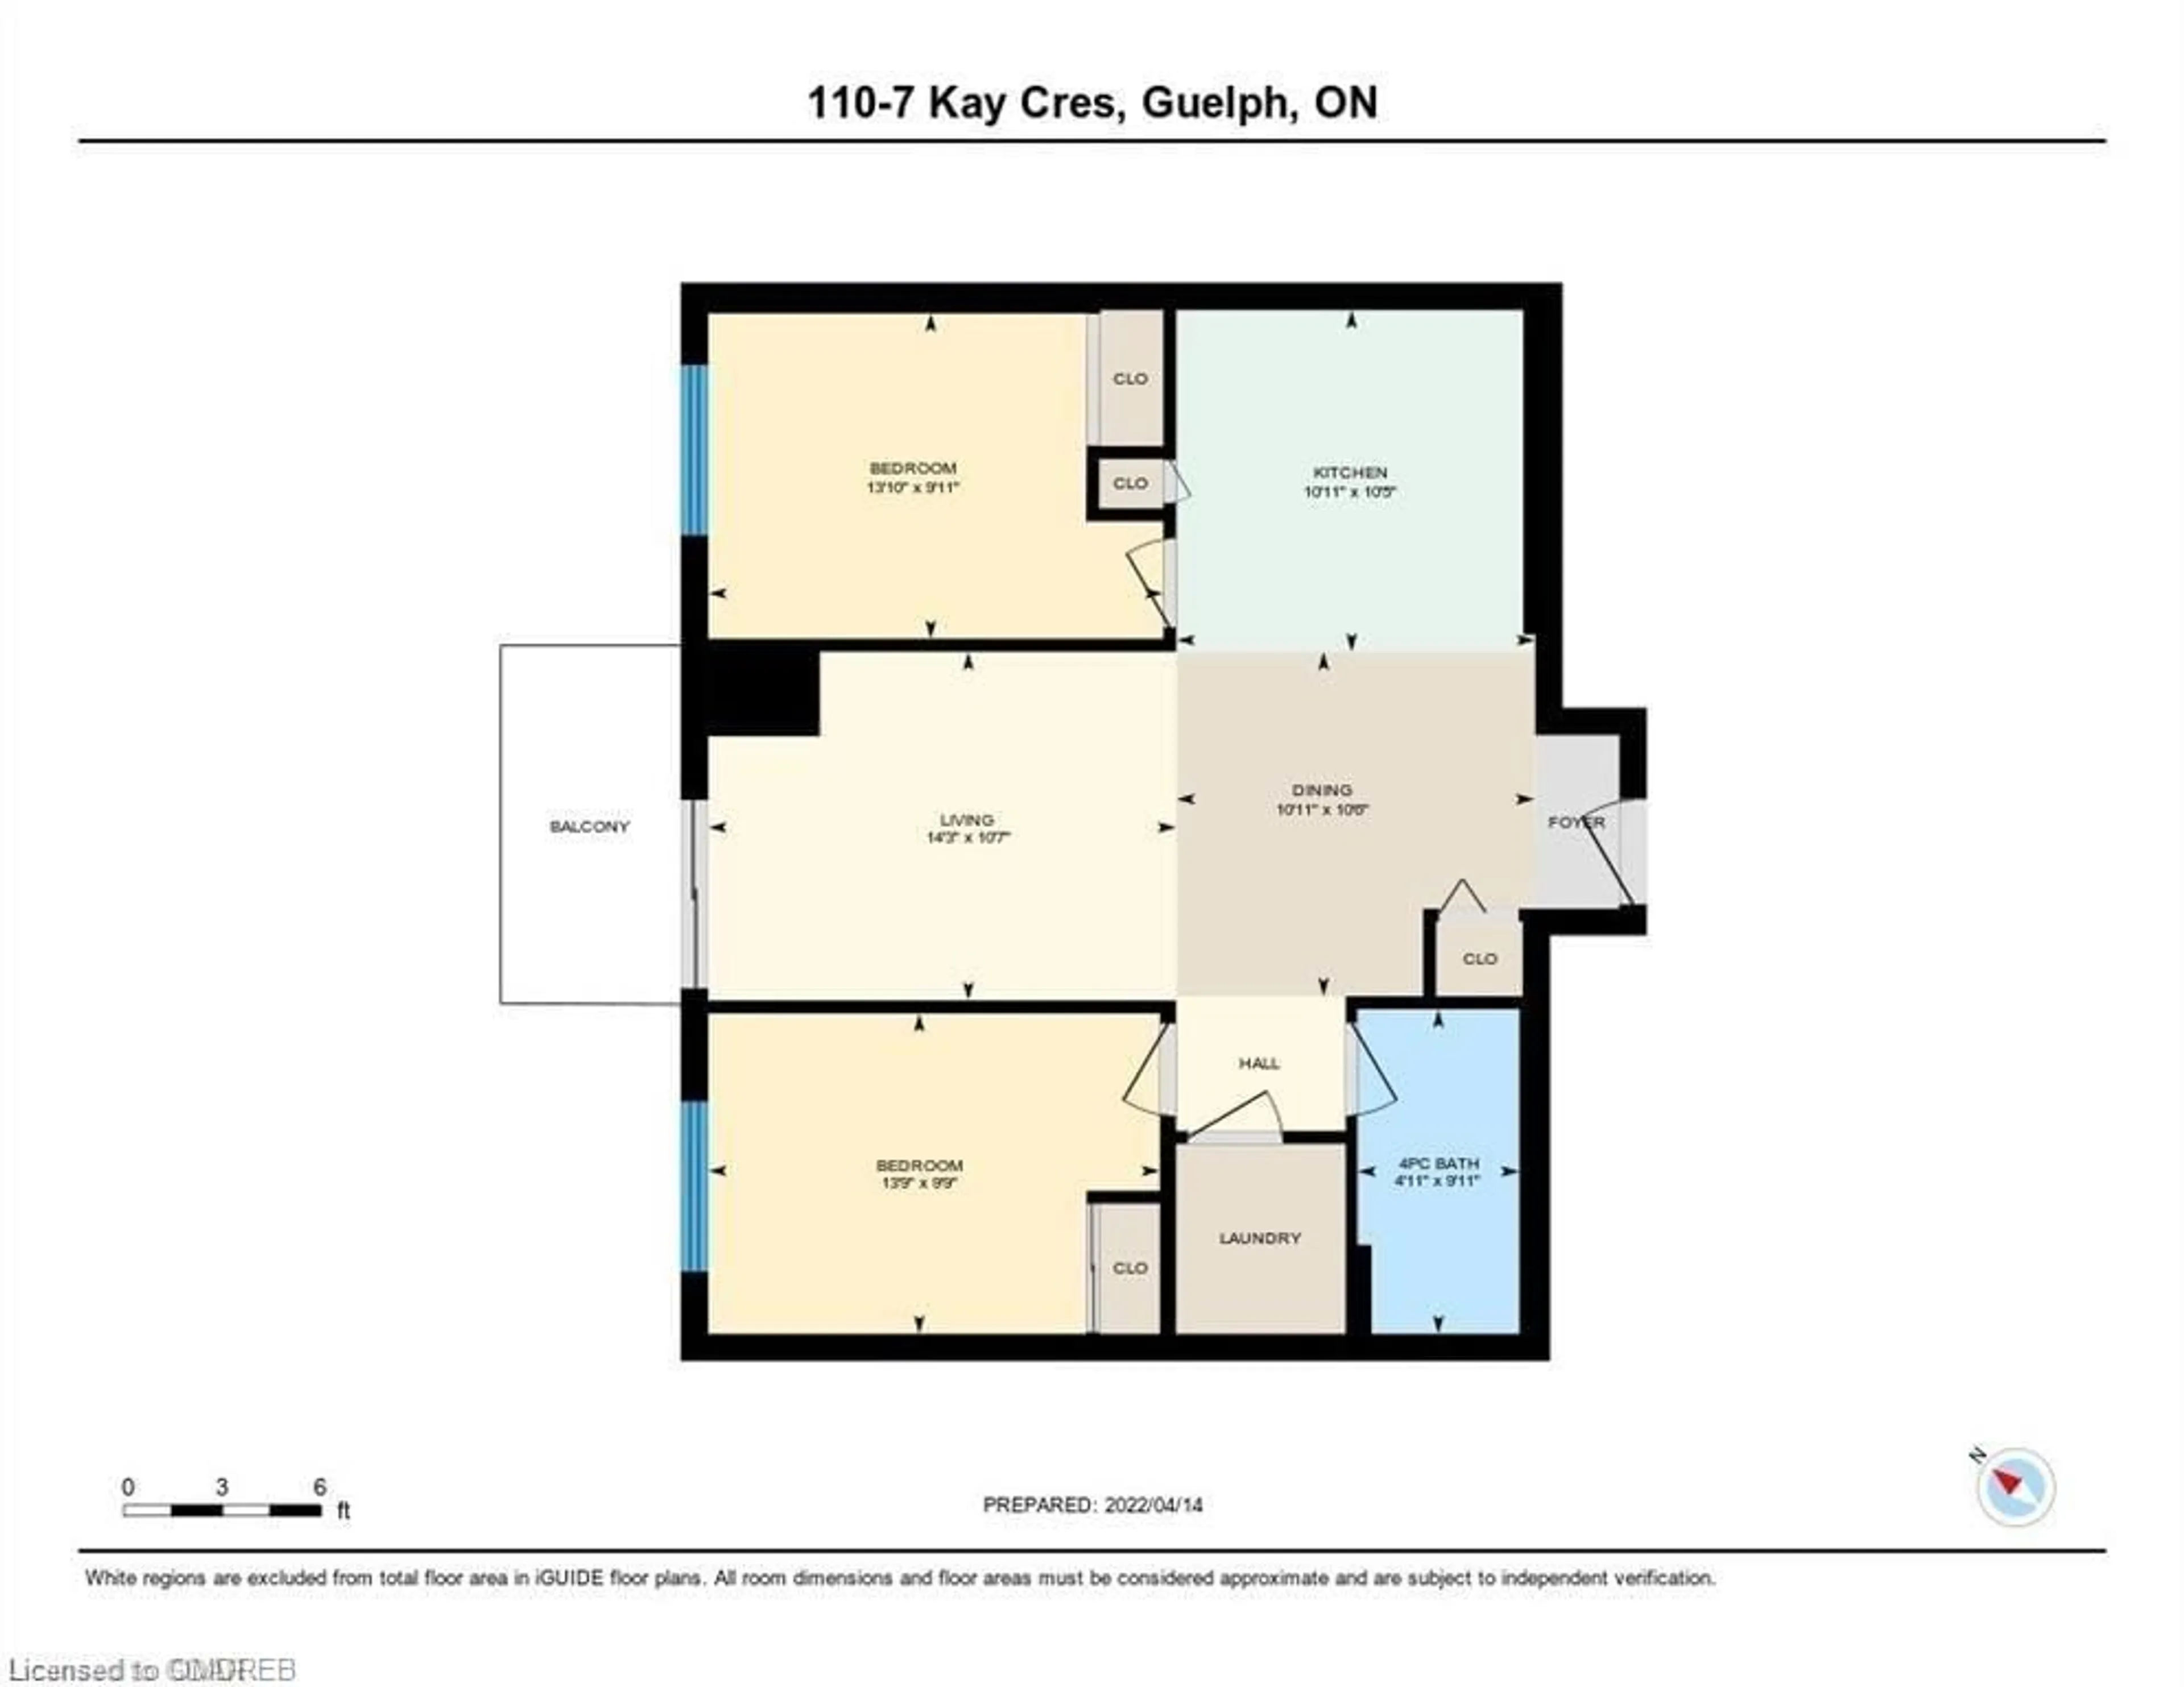 Floor plan for 7 Kay Cres #110, Guelph Ontario N1L 0P9